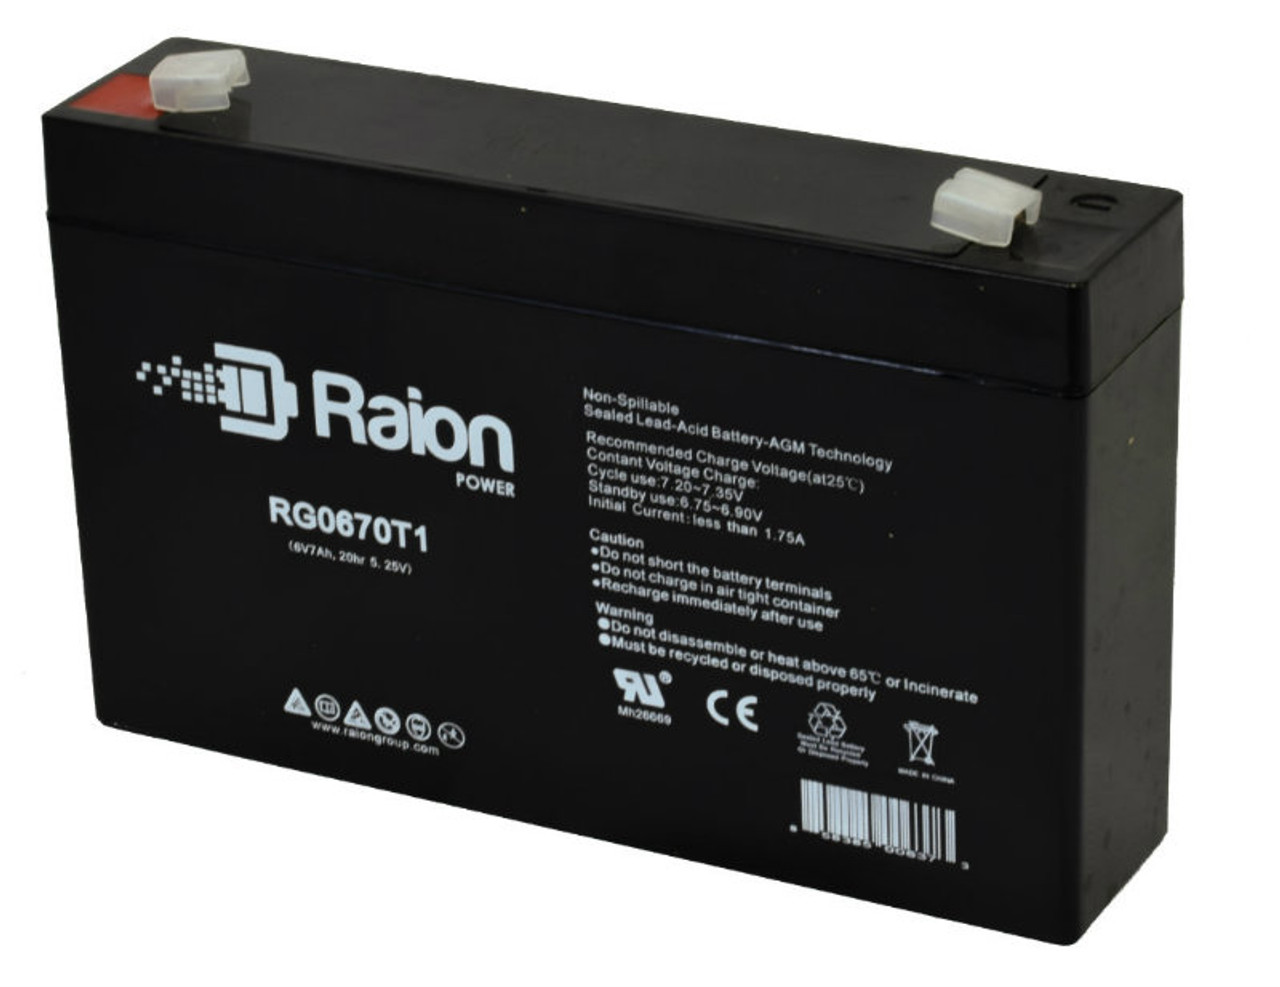 Raion Power 6V 7Ah Replacement Ride-On Toy Battery Cartridge for Costzon 6V Ride on Car, Kids Battery Powered Electric Vehicle